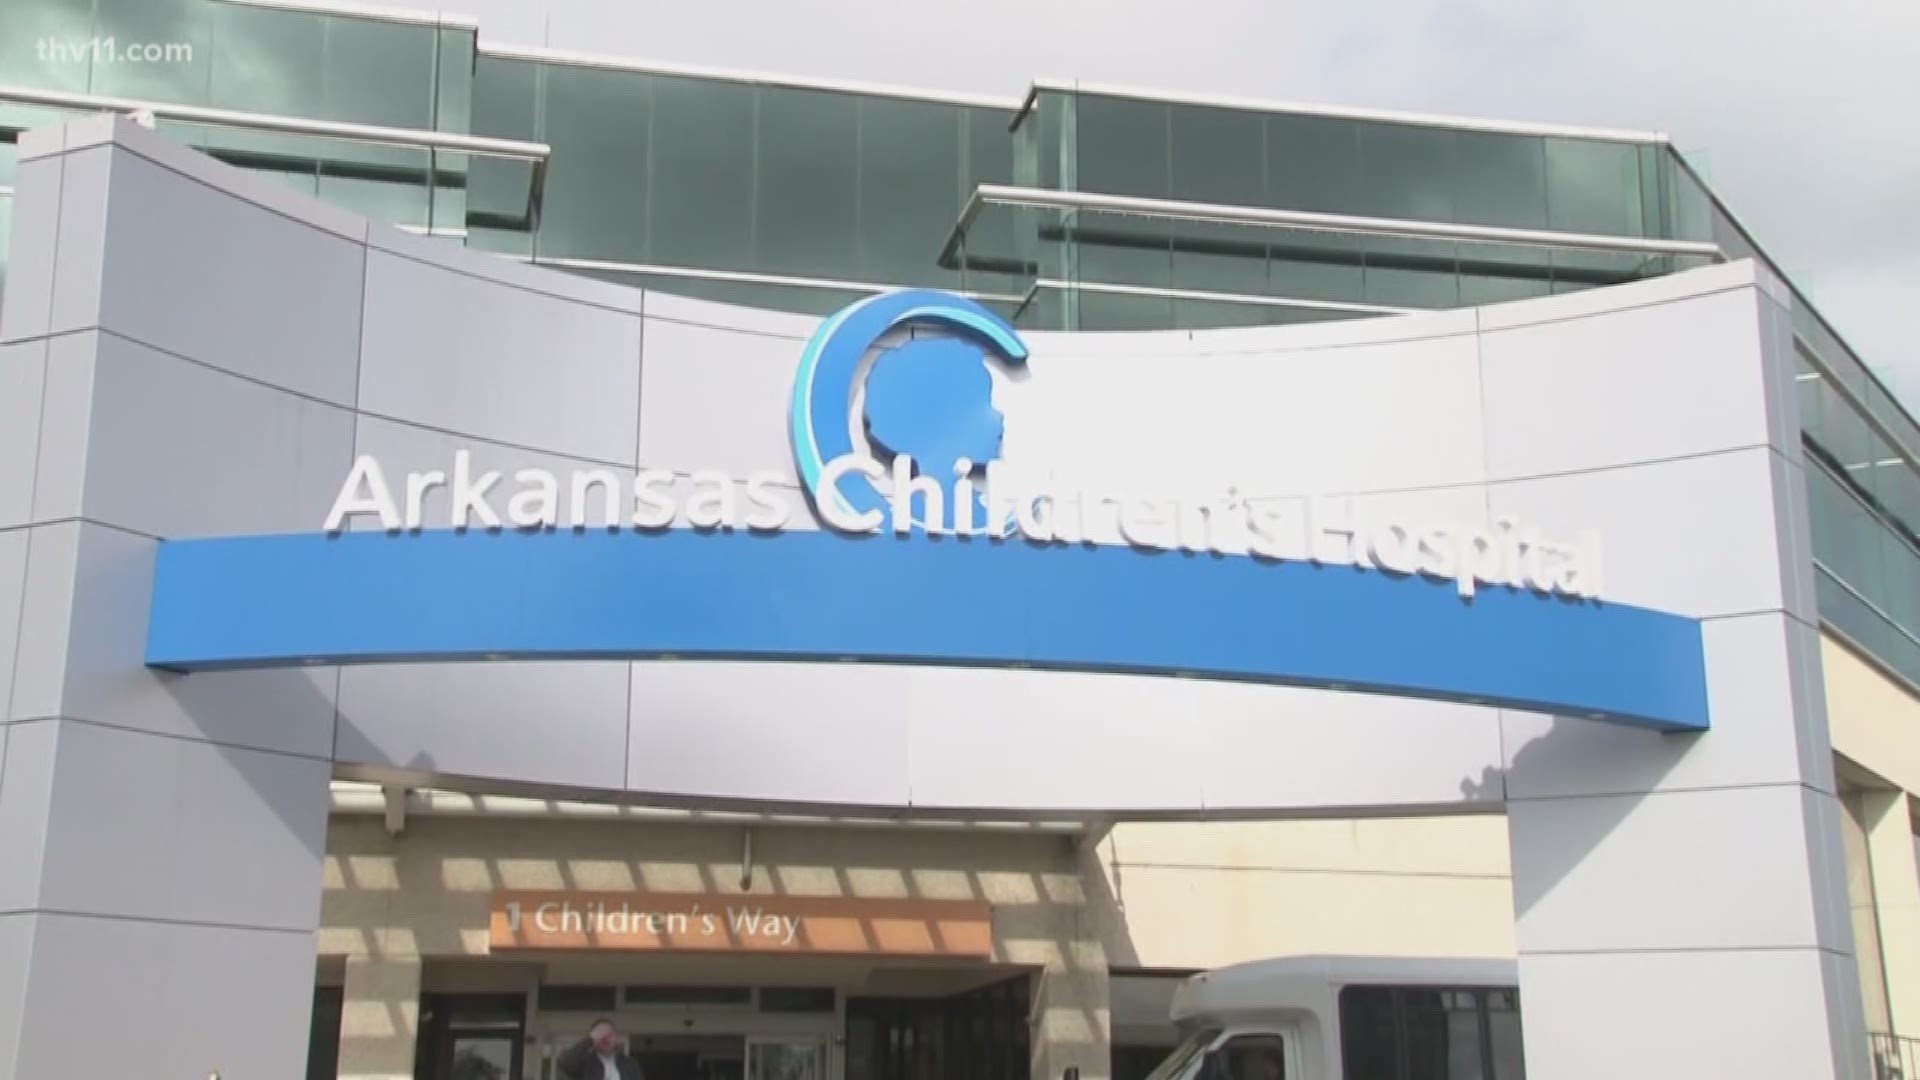 Patients and employees at Arkansas Children's Hospital have on less thing to worry about as the hospital is well-equipped to handle severe weather threats.